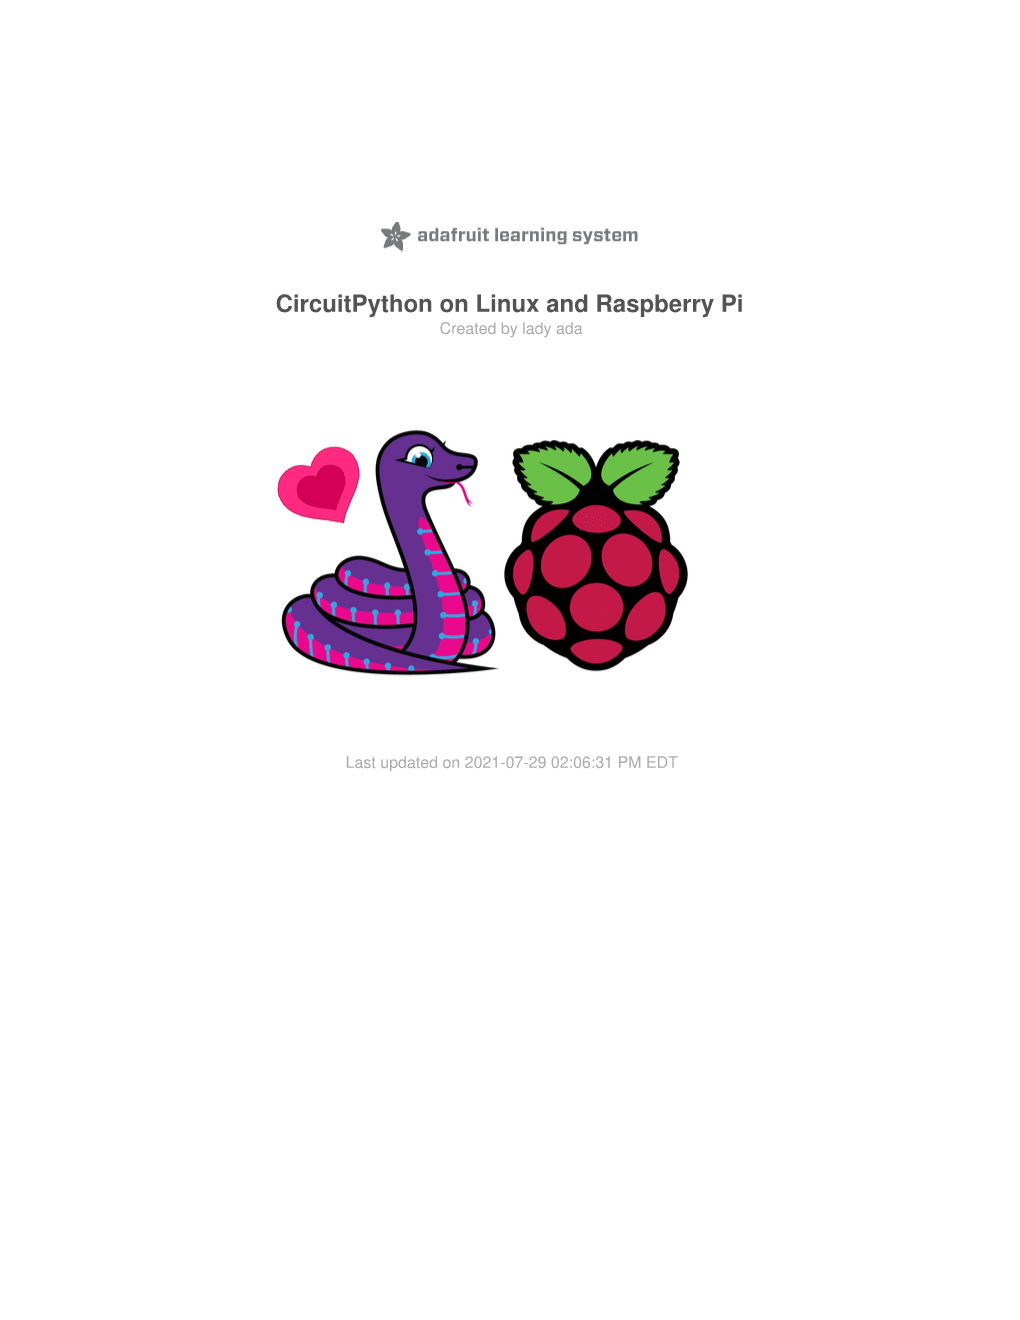 Circuitpython on Linux and Raspberry Pi Created by Lady Ada